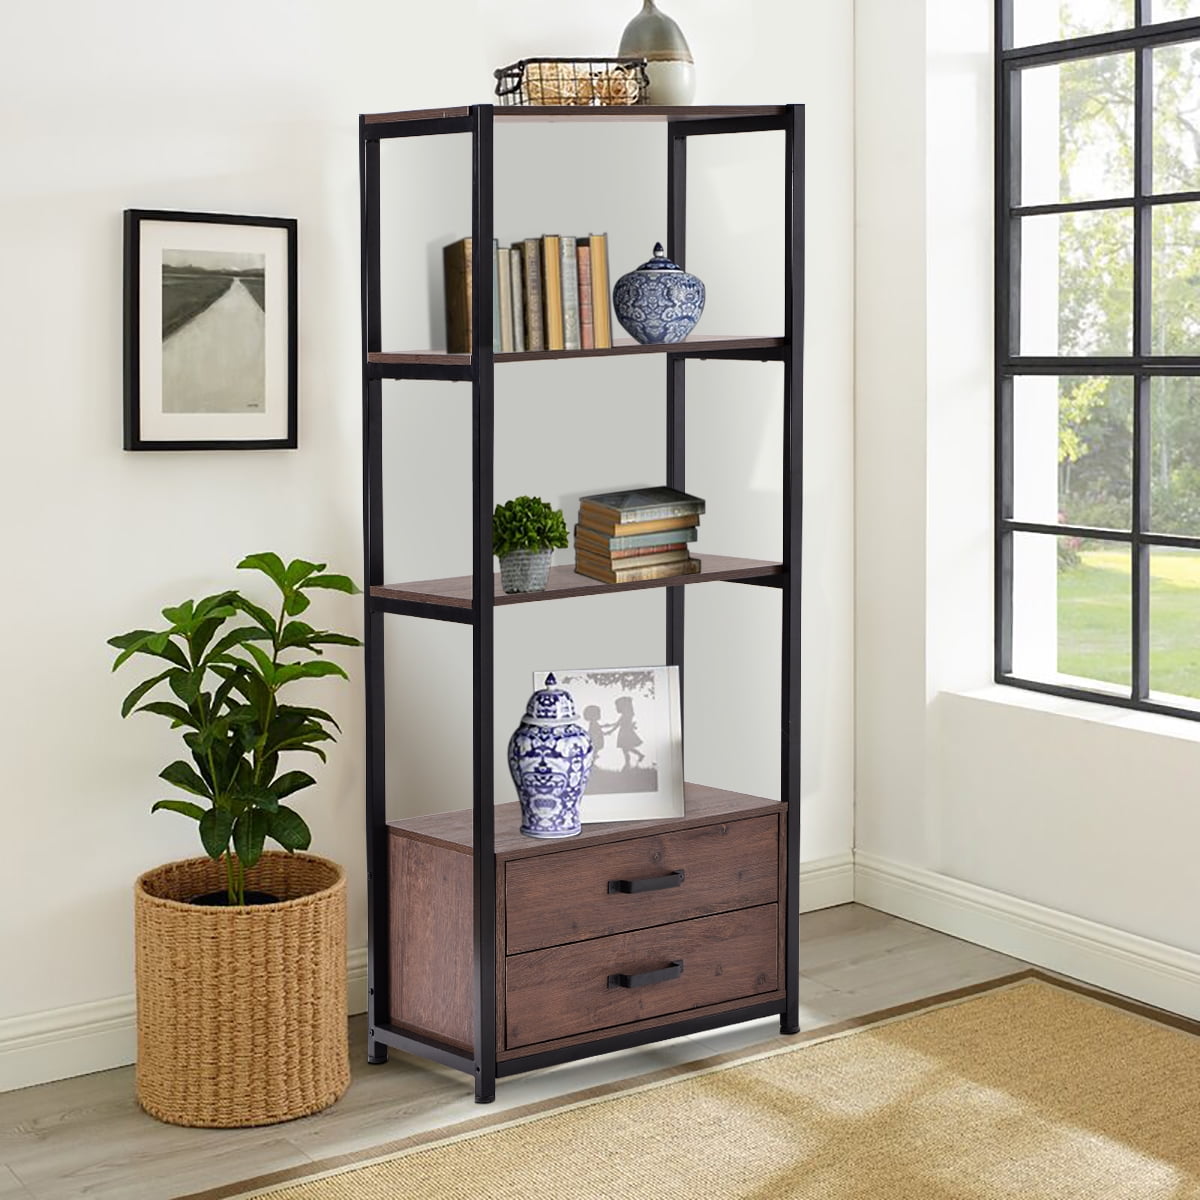 4 Tier Industrial Standing Bookshelf, Bookcase With Drawer At Bottom